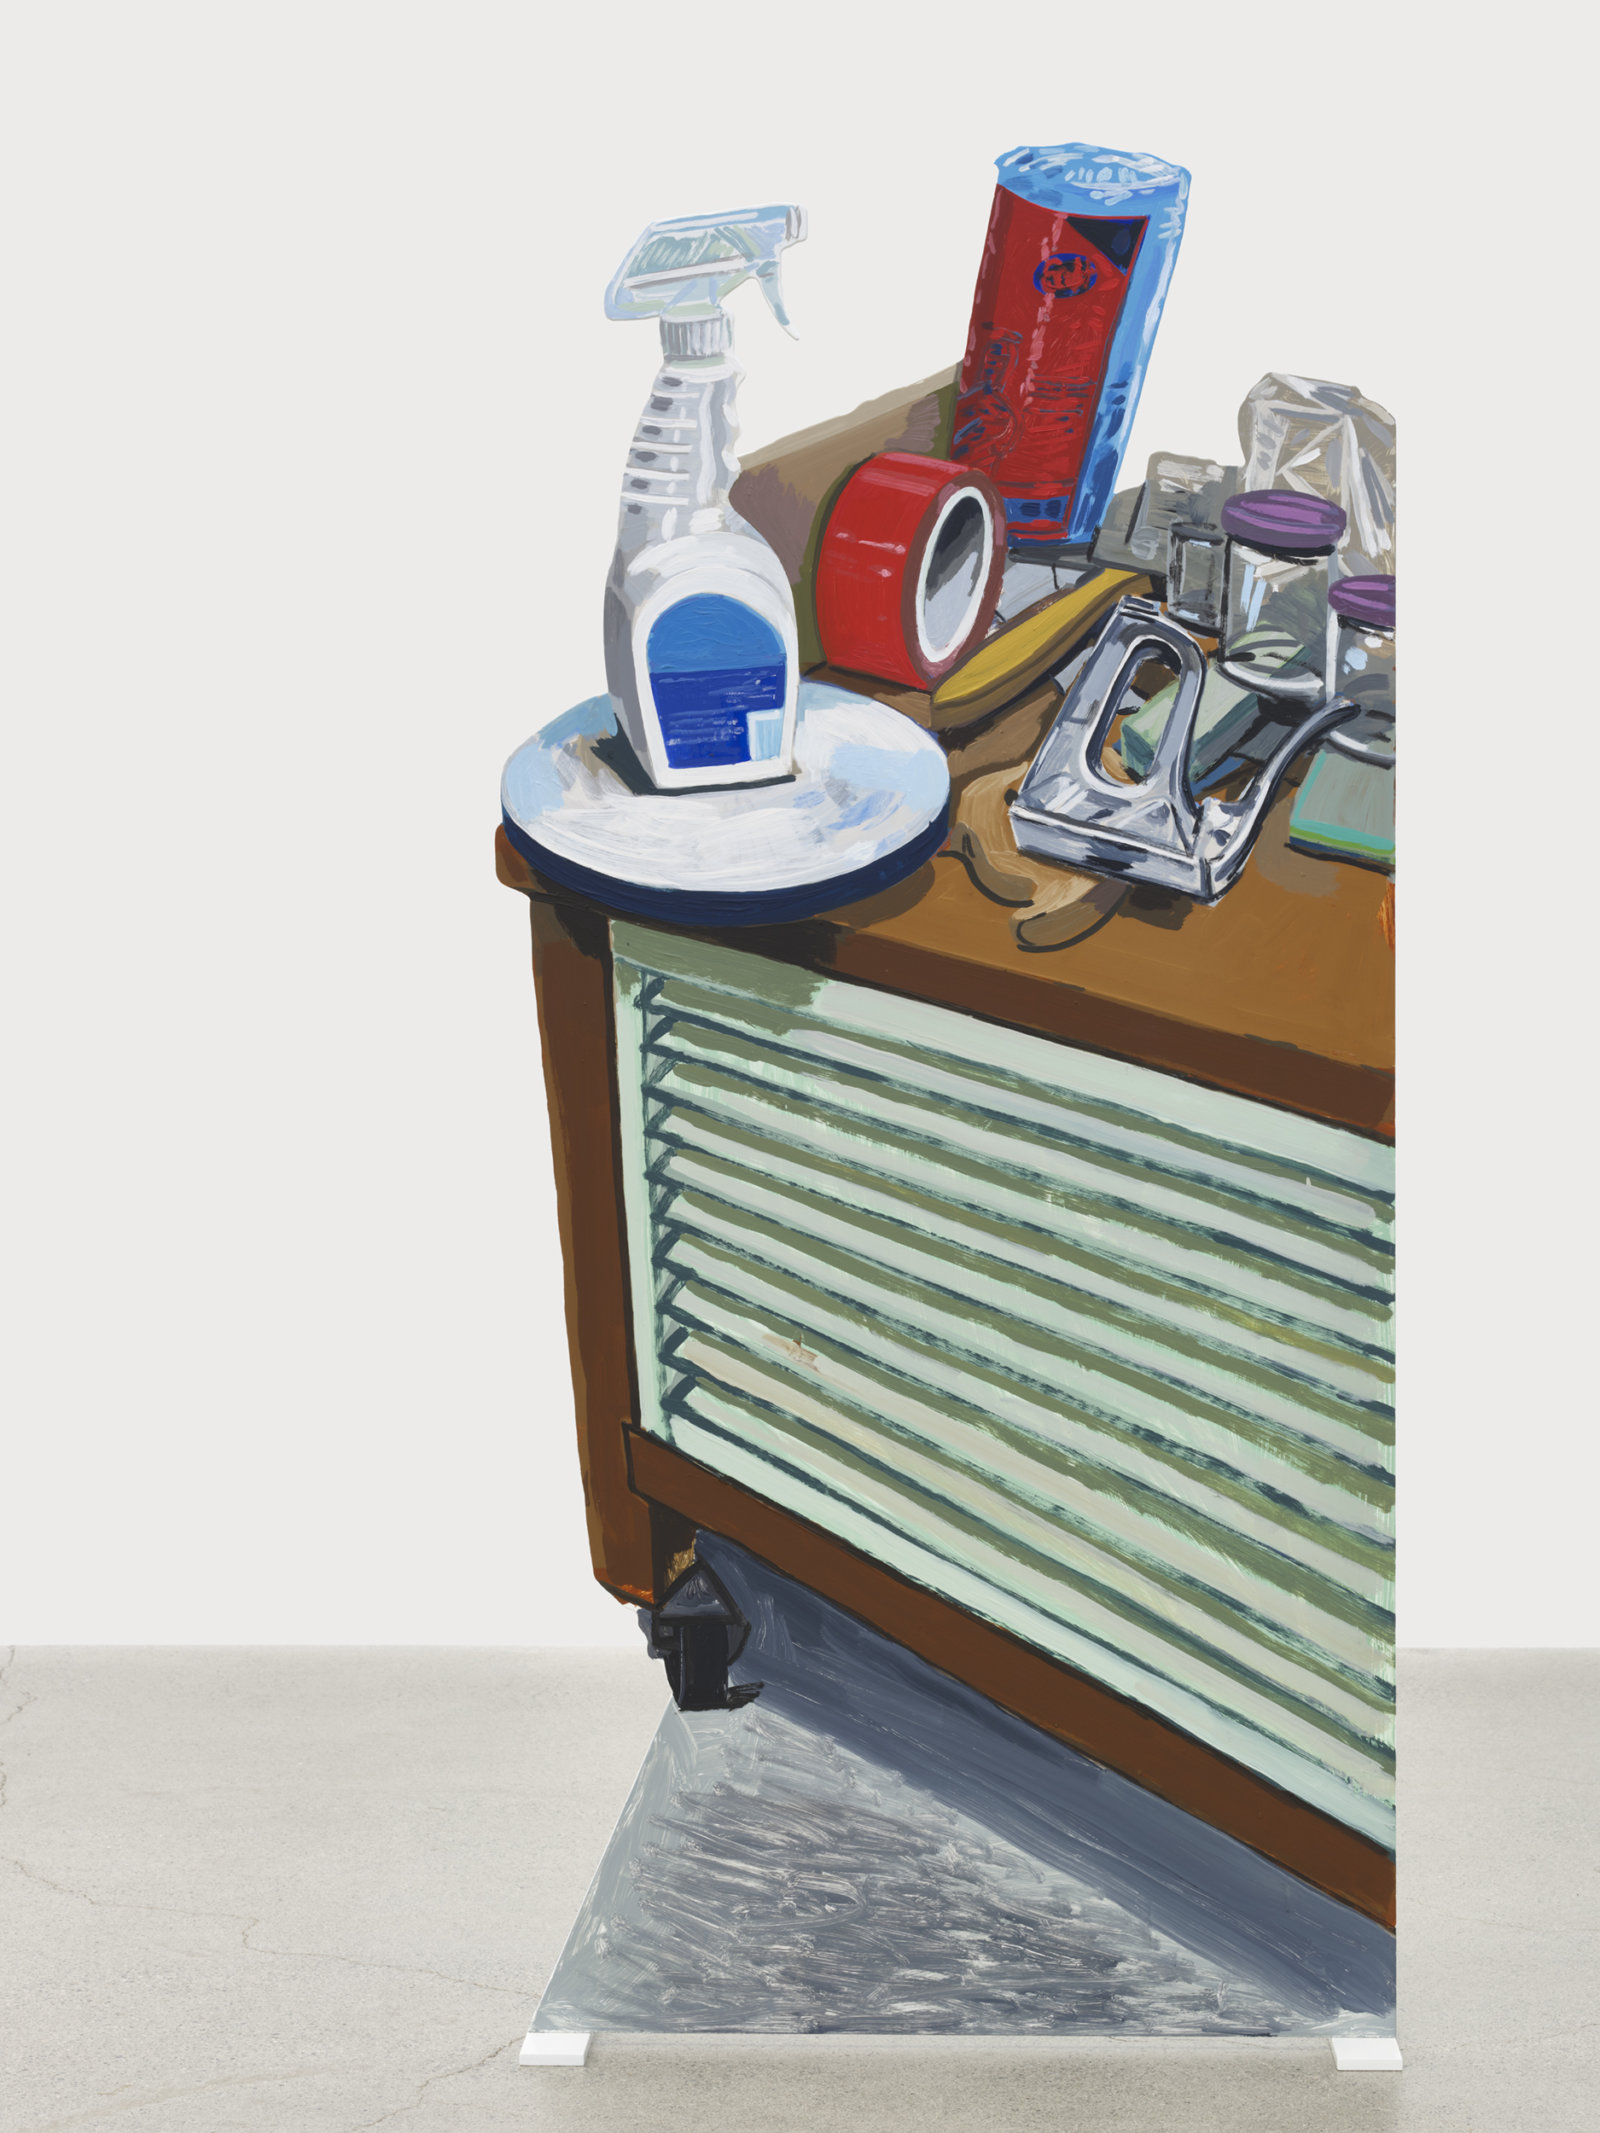 Damian Moppett, Flat Files and Cleaning Products, 2023, oil and enamel on aluminum, 59 x 28 in. (151 x 71 cm)